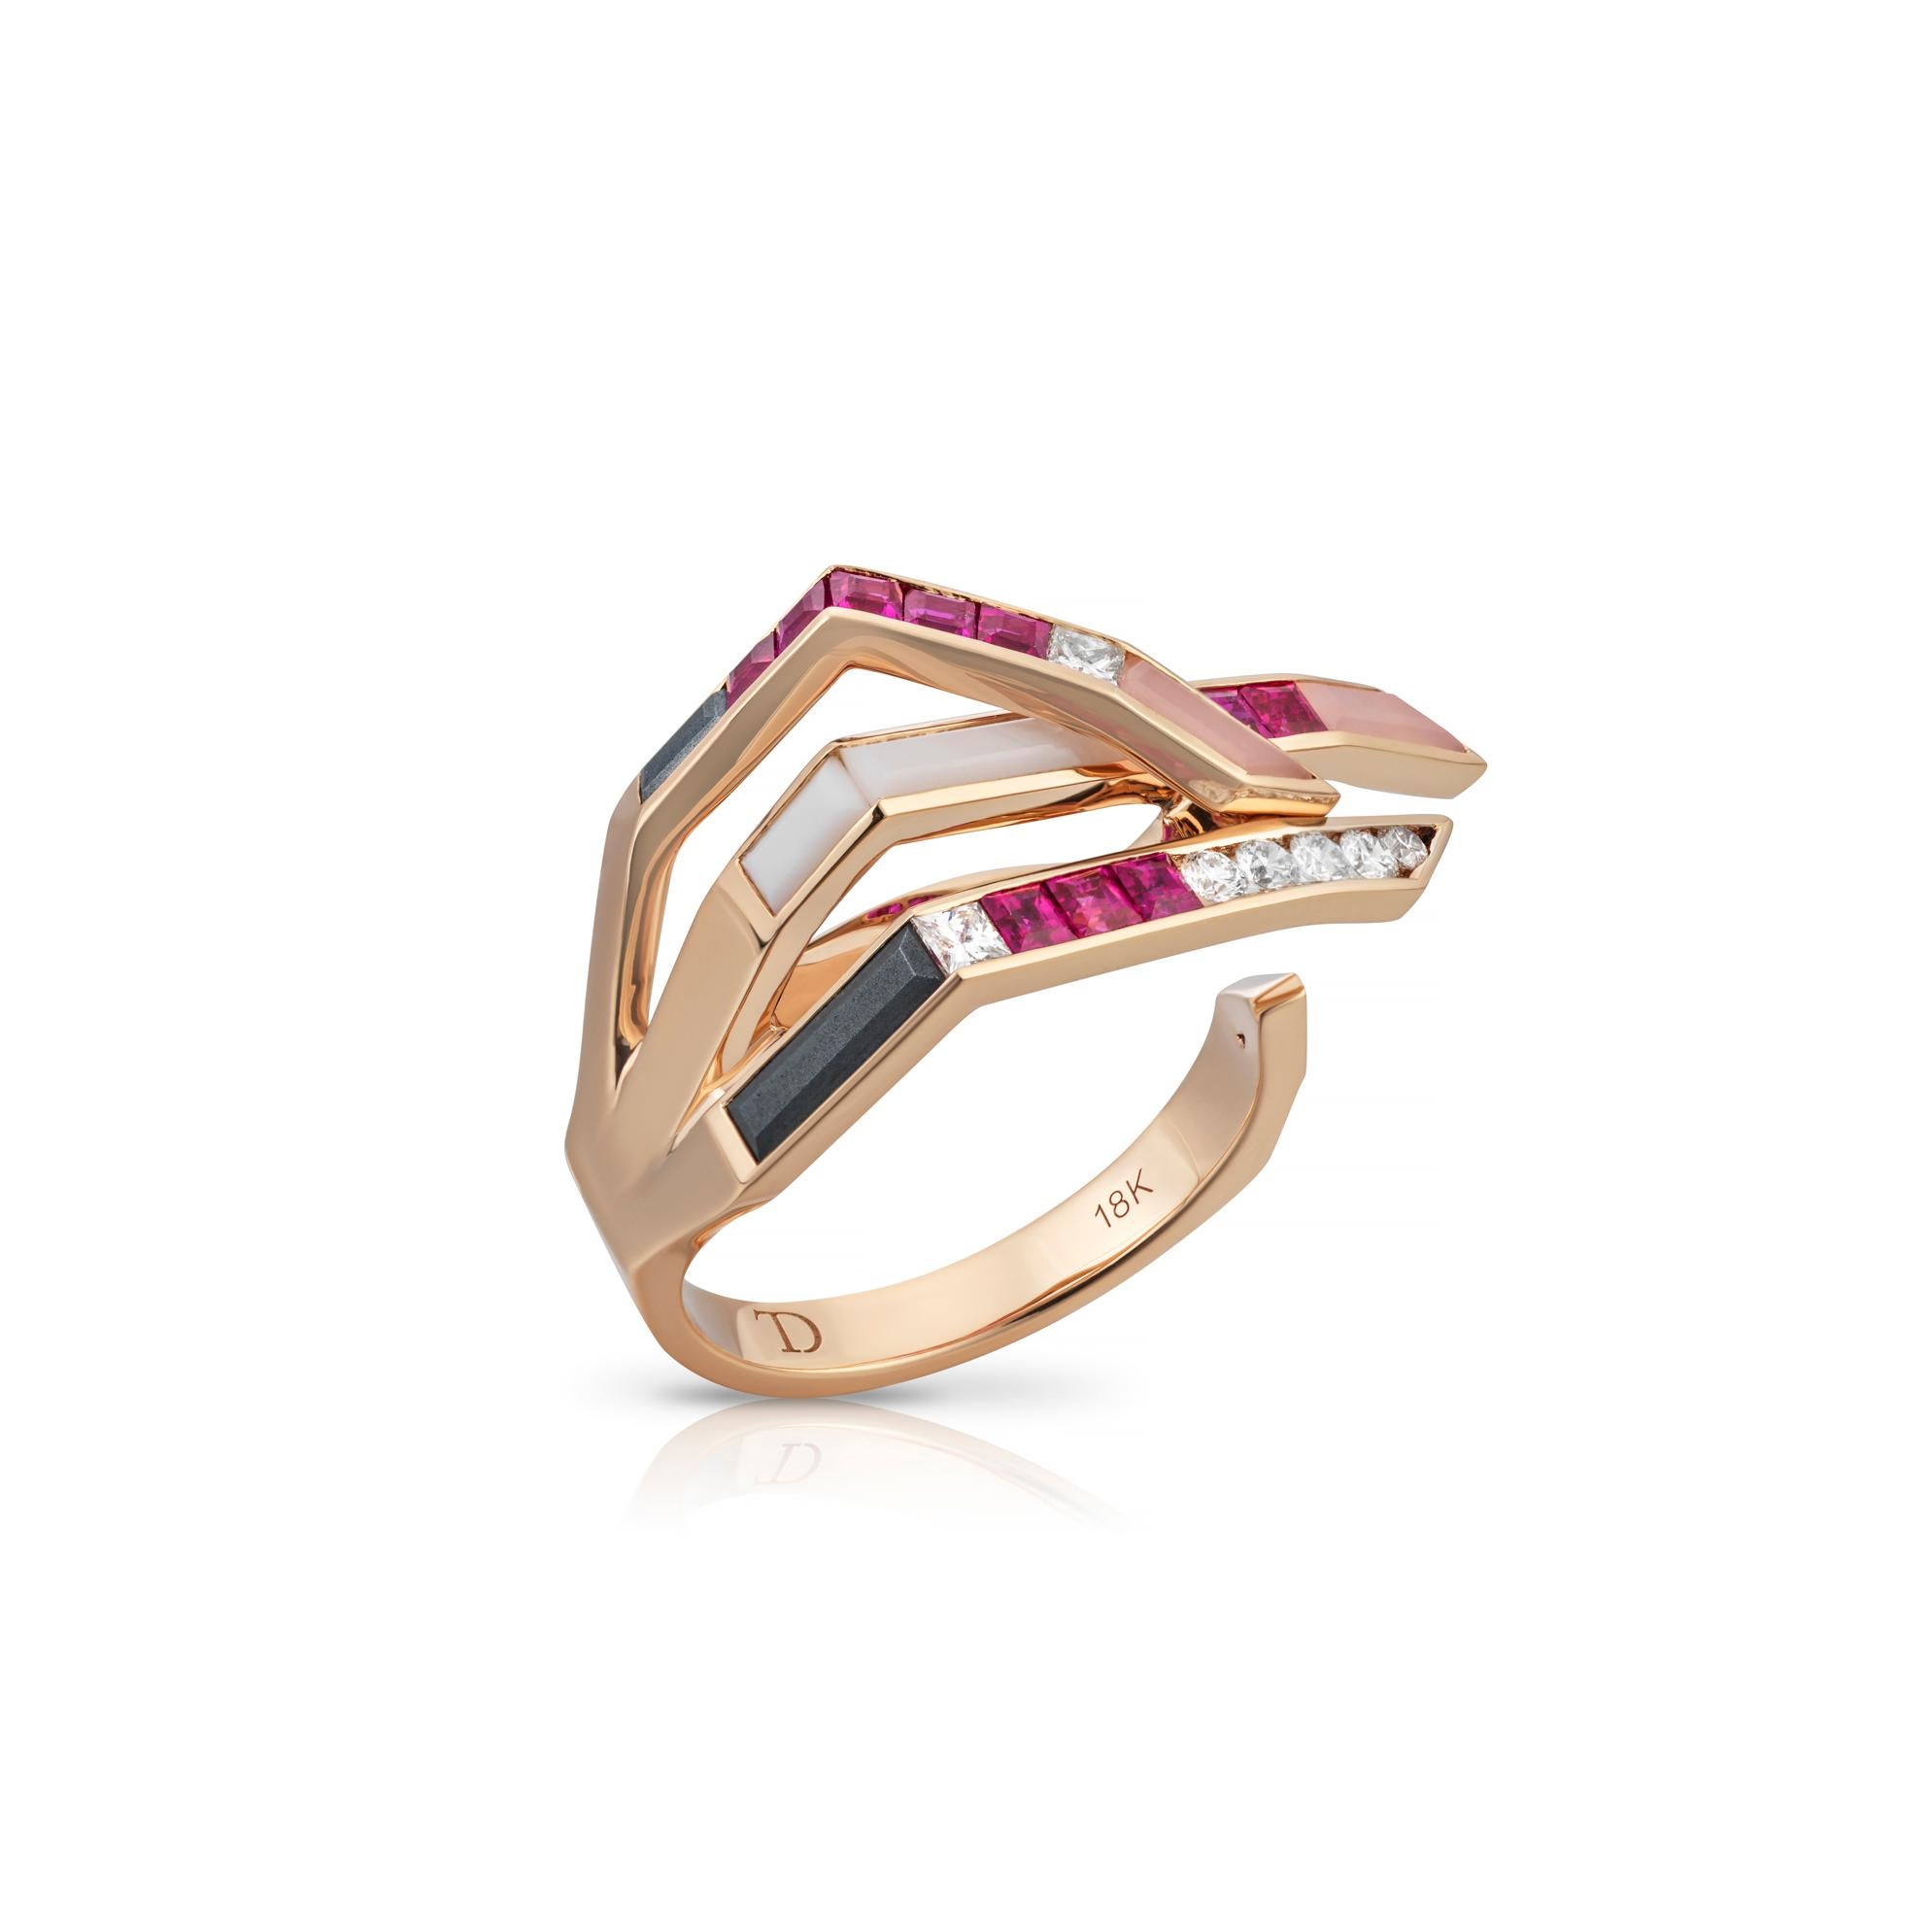 This architectural Wing ring from the Stellar collection creates a three-dimensional wave on your finger for a bold and contemporary look.
Inspired by artist Frank Stella’s vivid geometric paintings from the 1970s, the Stellar collection combines